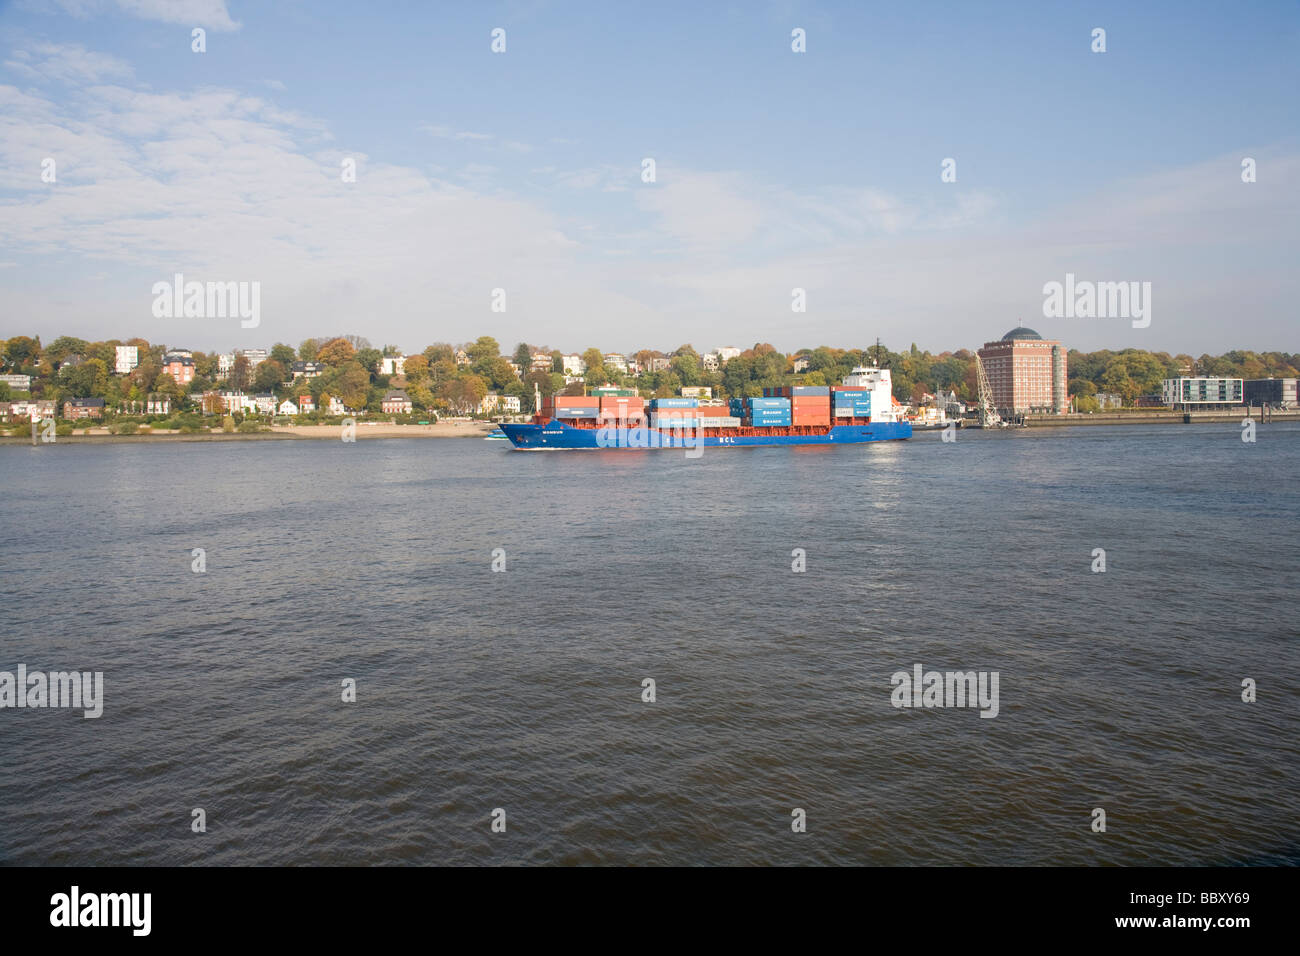 A small to medium size container ship heads out to see along the Elbe, Hamburg Stock Photo